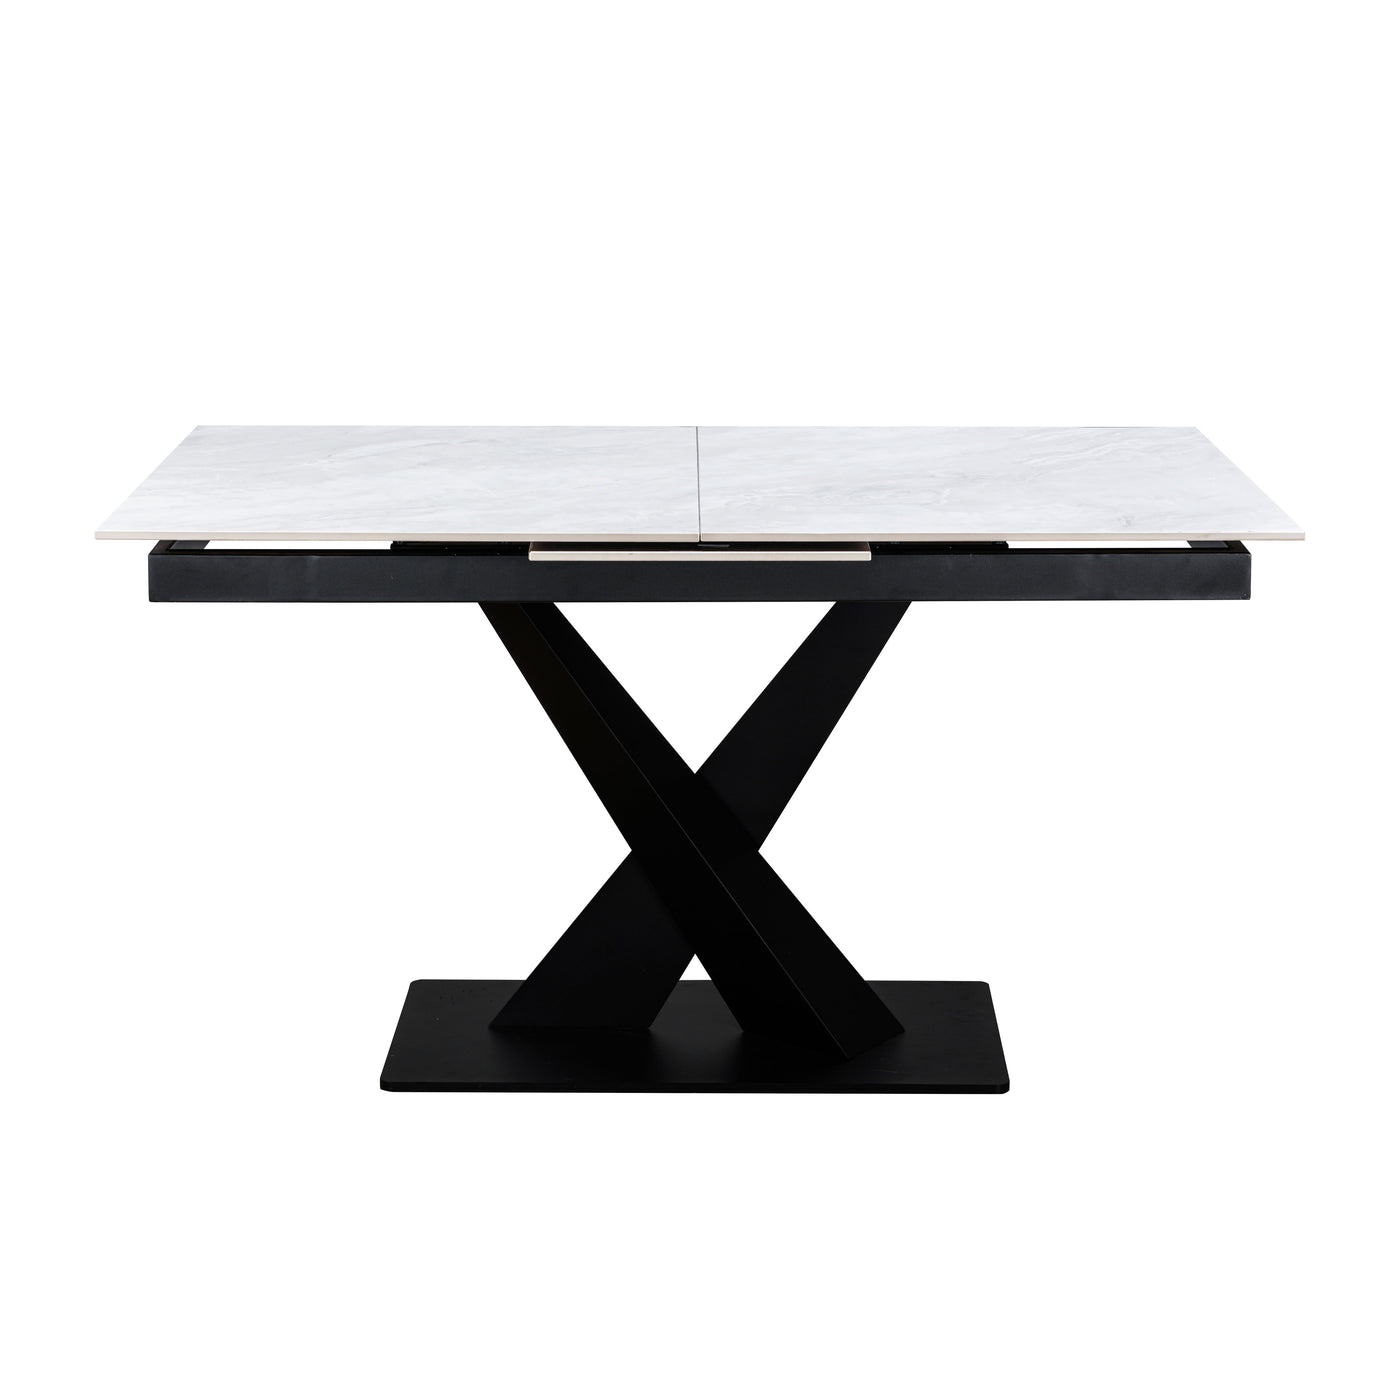 Toronto 140-180cm White Ceramic Marble Extending Dining Table With Velvet Dining Chairs